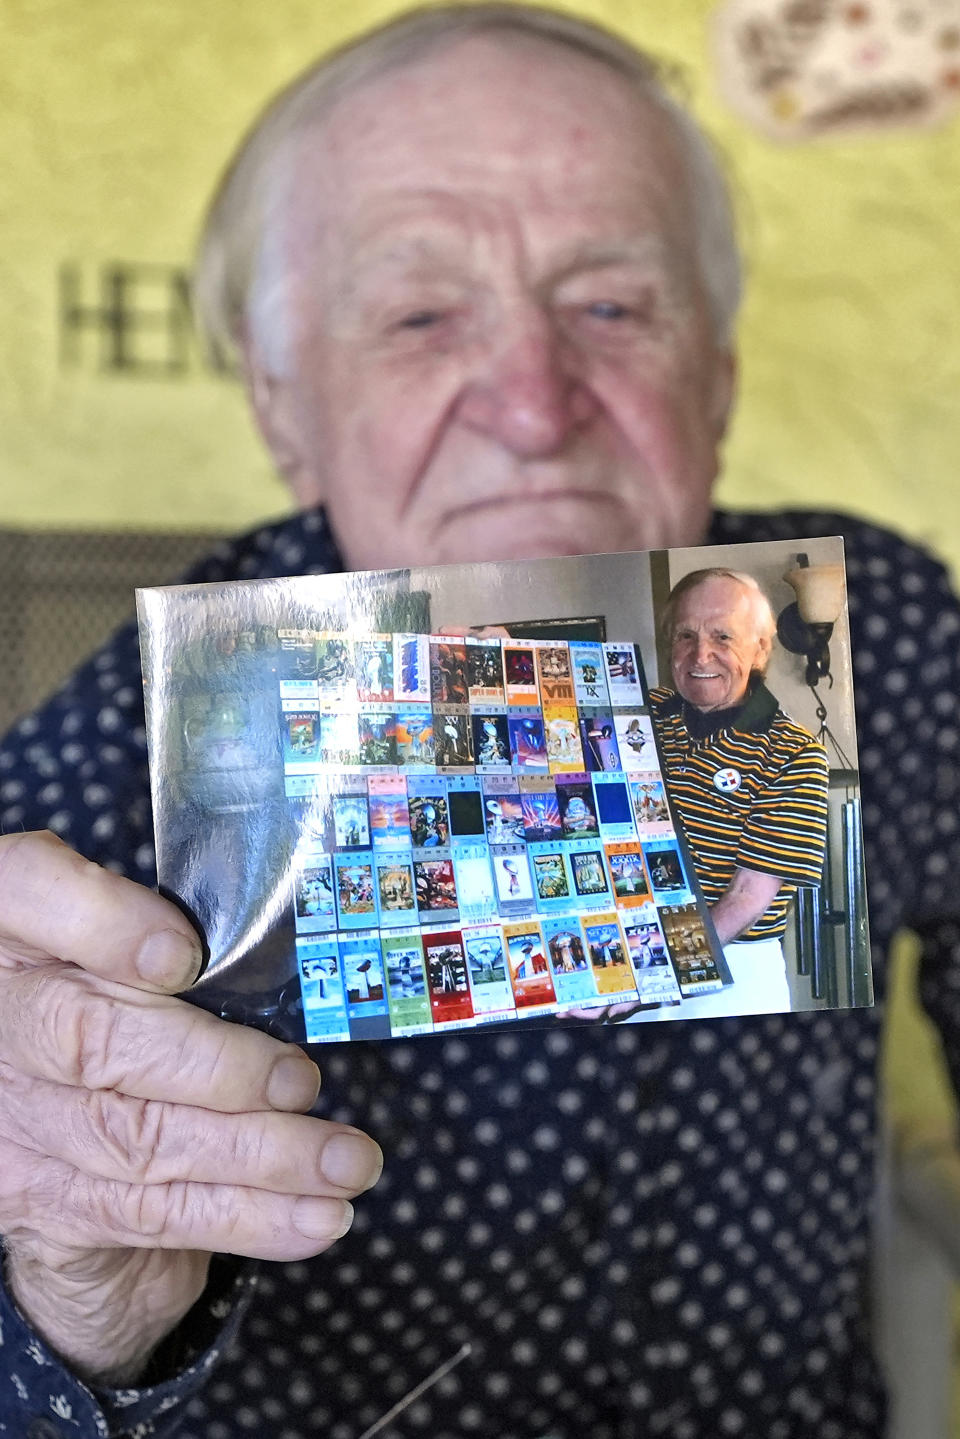 Tom Henschel holds up a photo of 50-yards of Super Bowl tickets during an interview at his home Thursday, Jan. 25, 2024, in Tampa, Fla. Three football fans in their 80s are keeping their membership in the "never missed a Super Bowl" club. (AP Photo/Chris O'Meara)